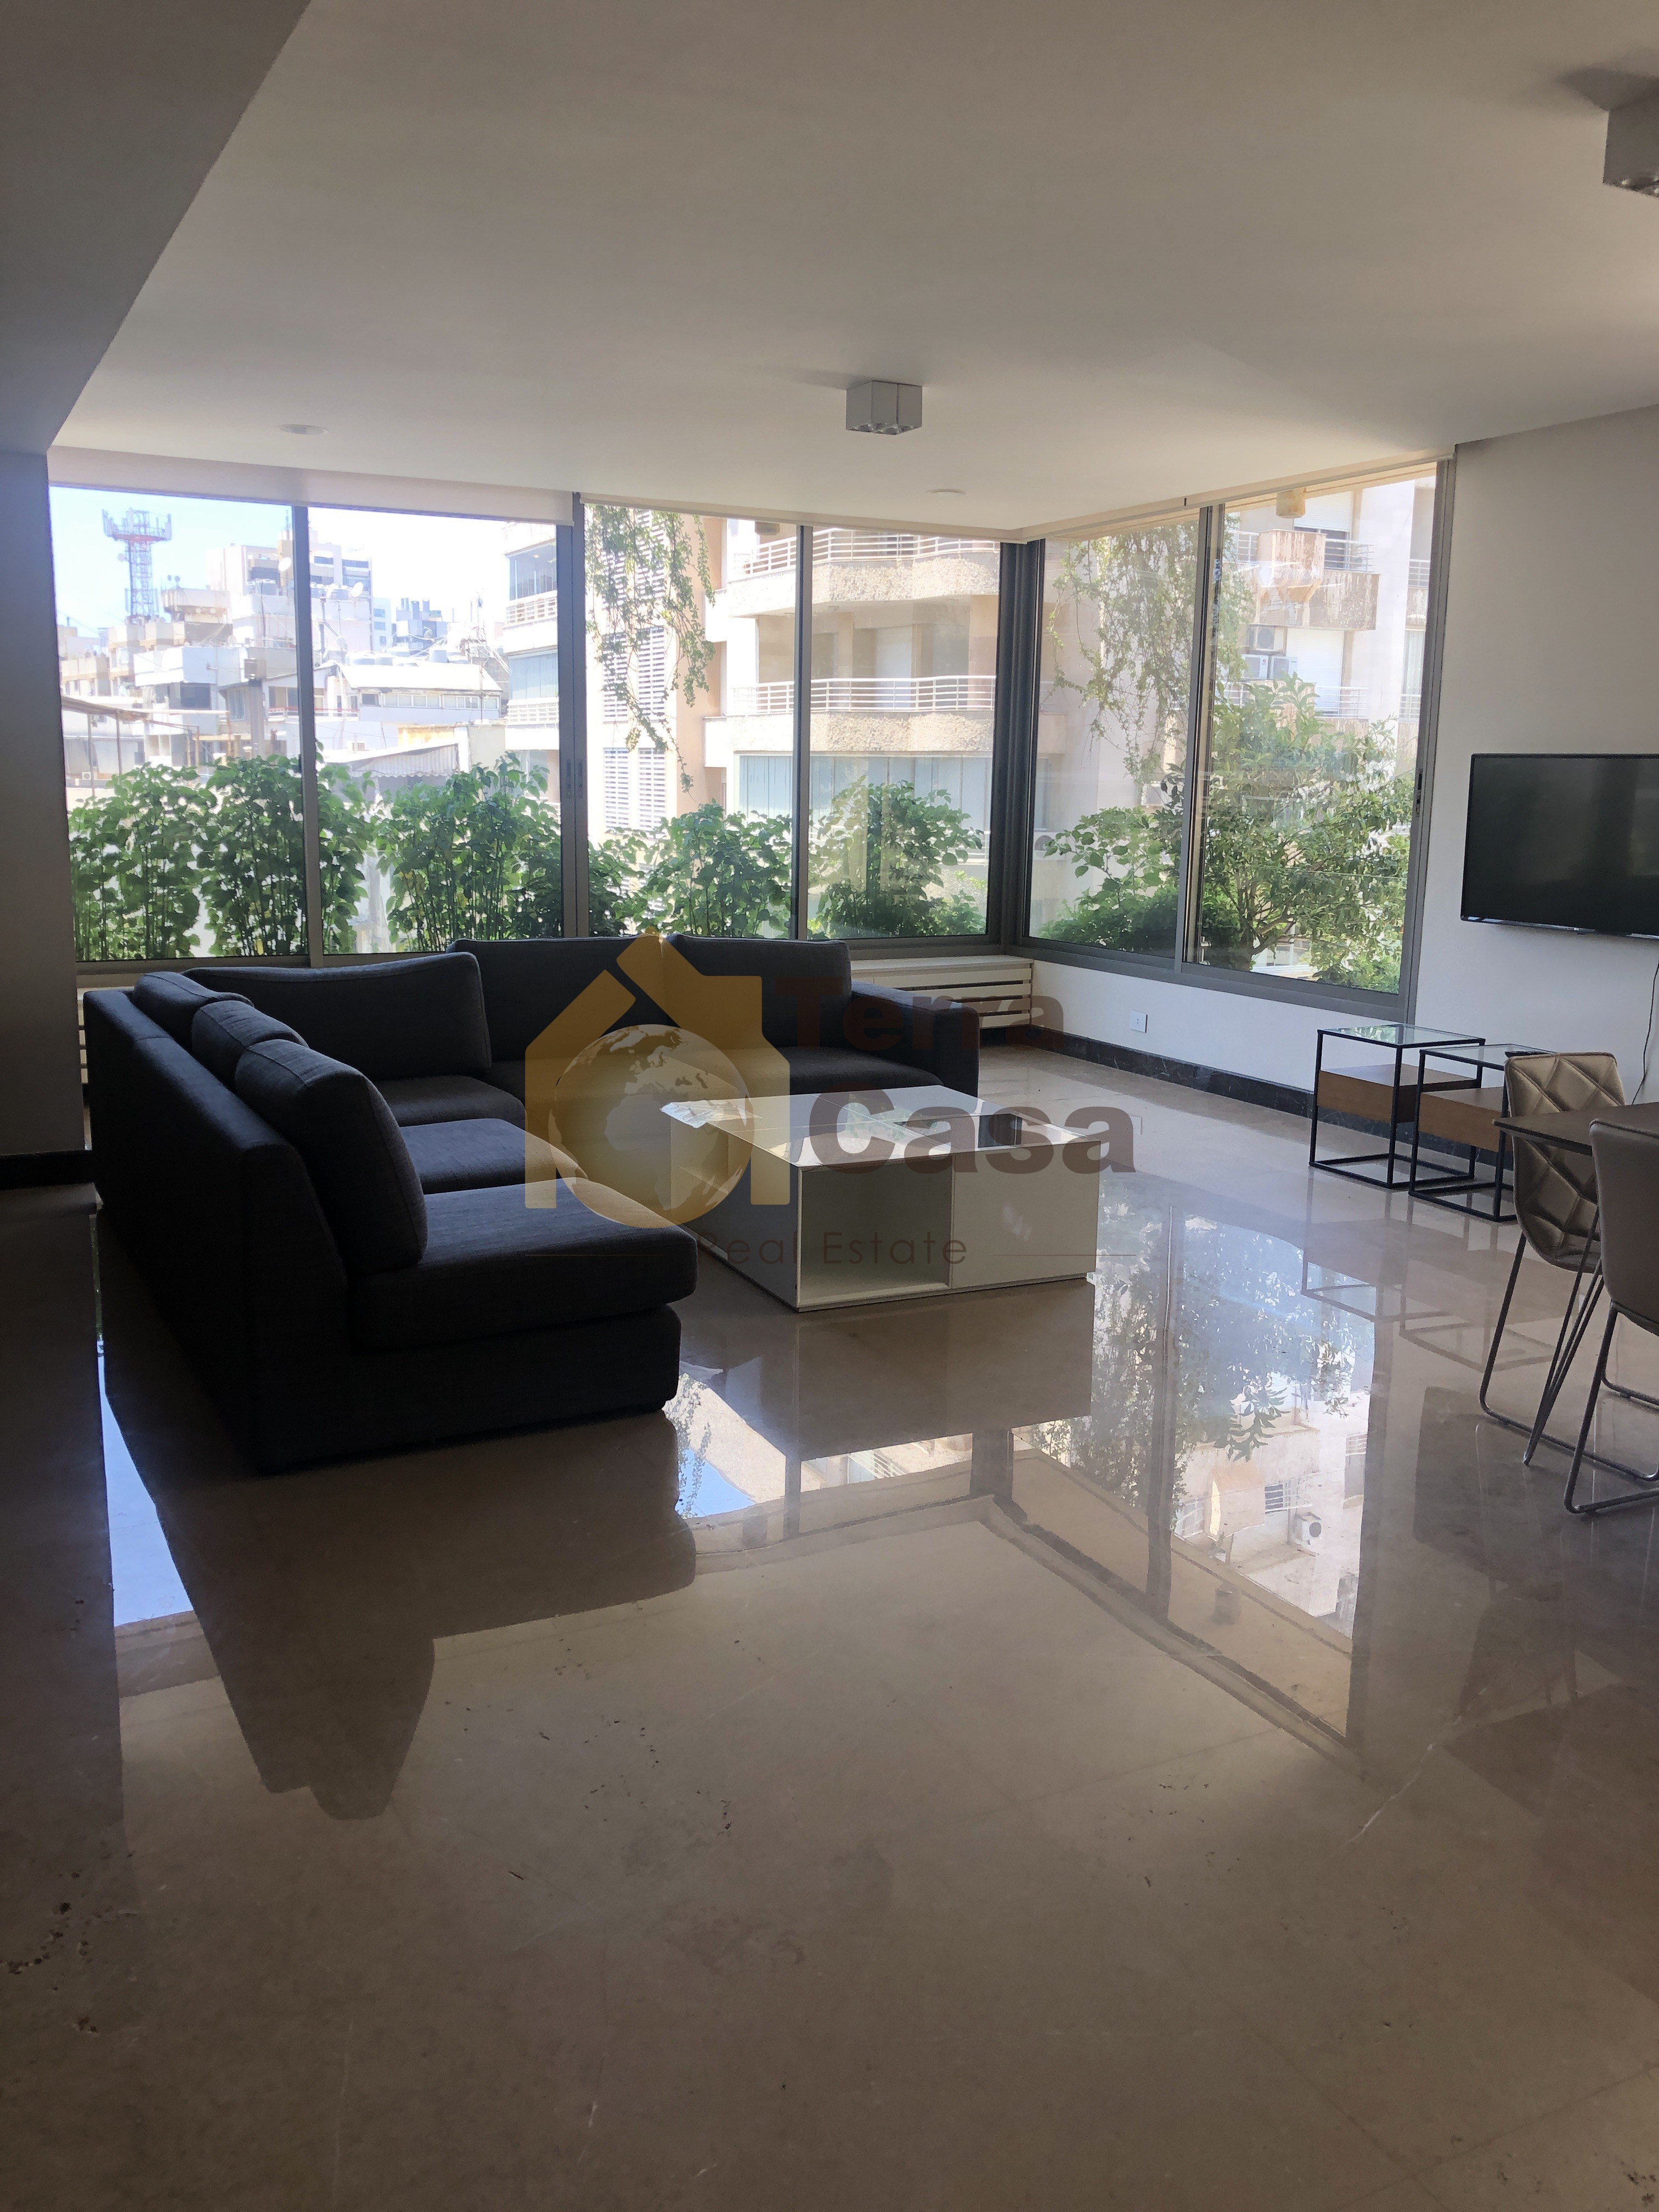 Hamra street apartment fully furnished for rent.